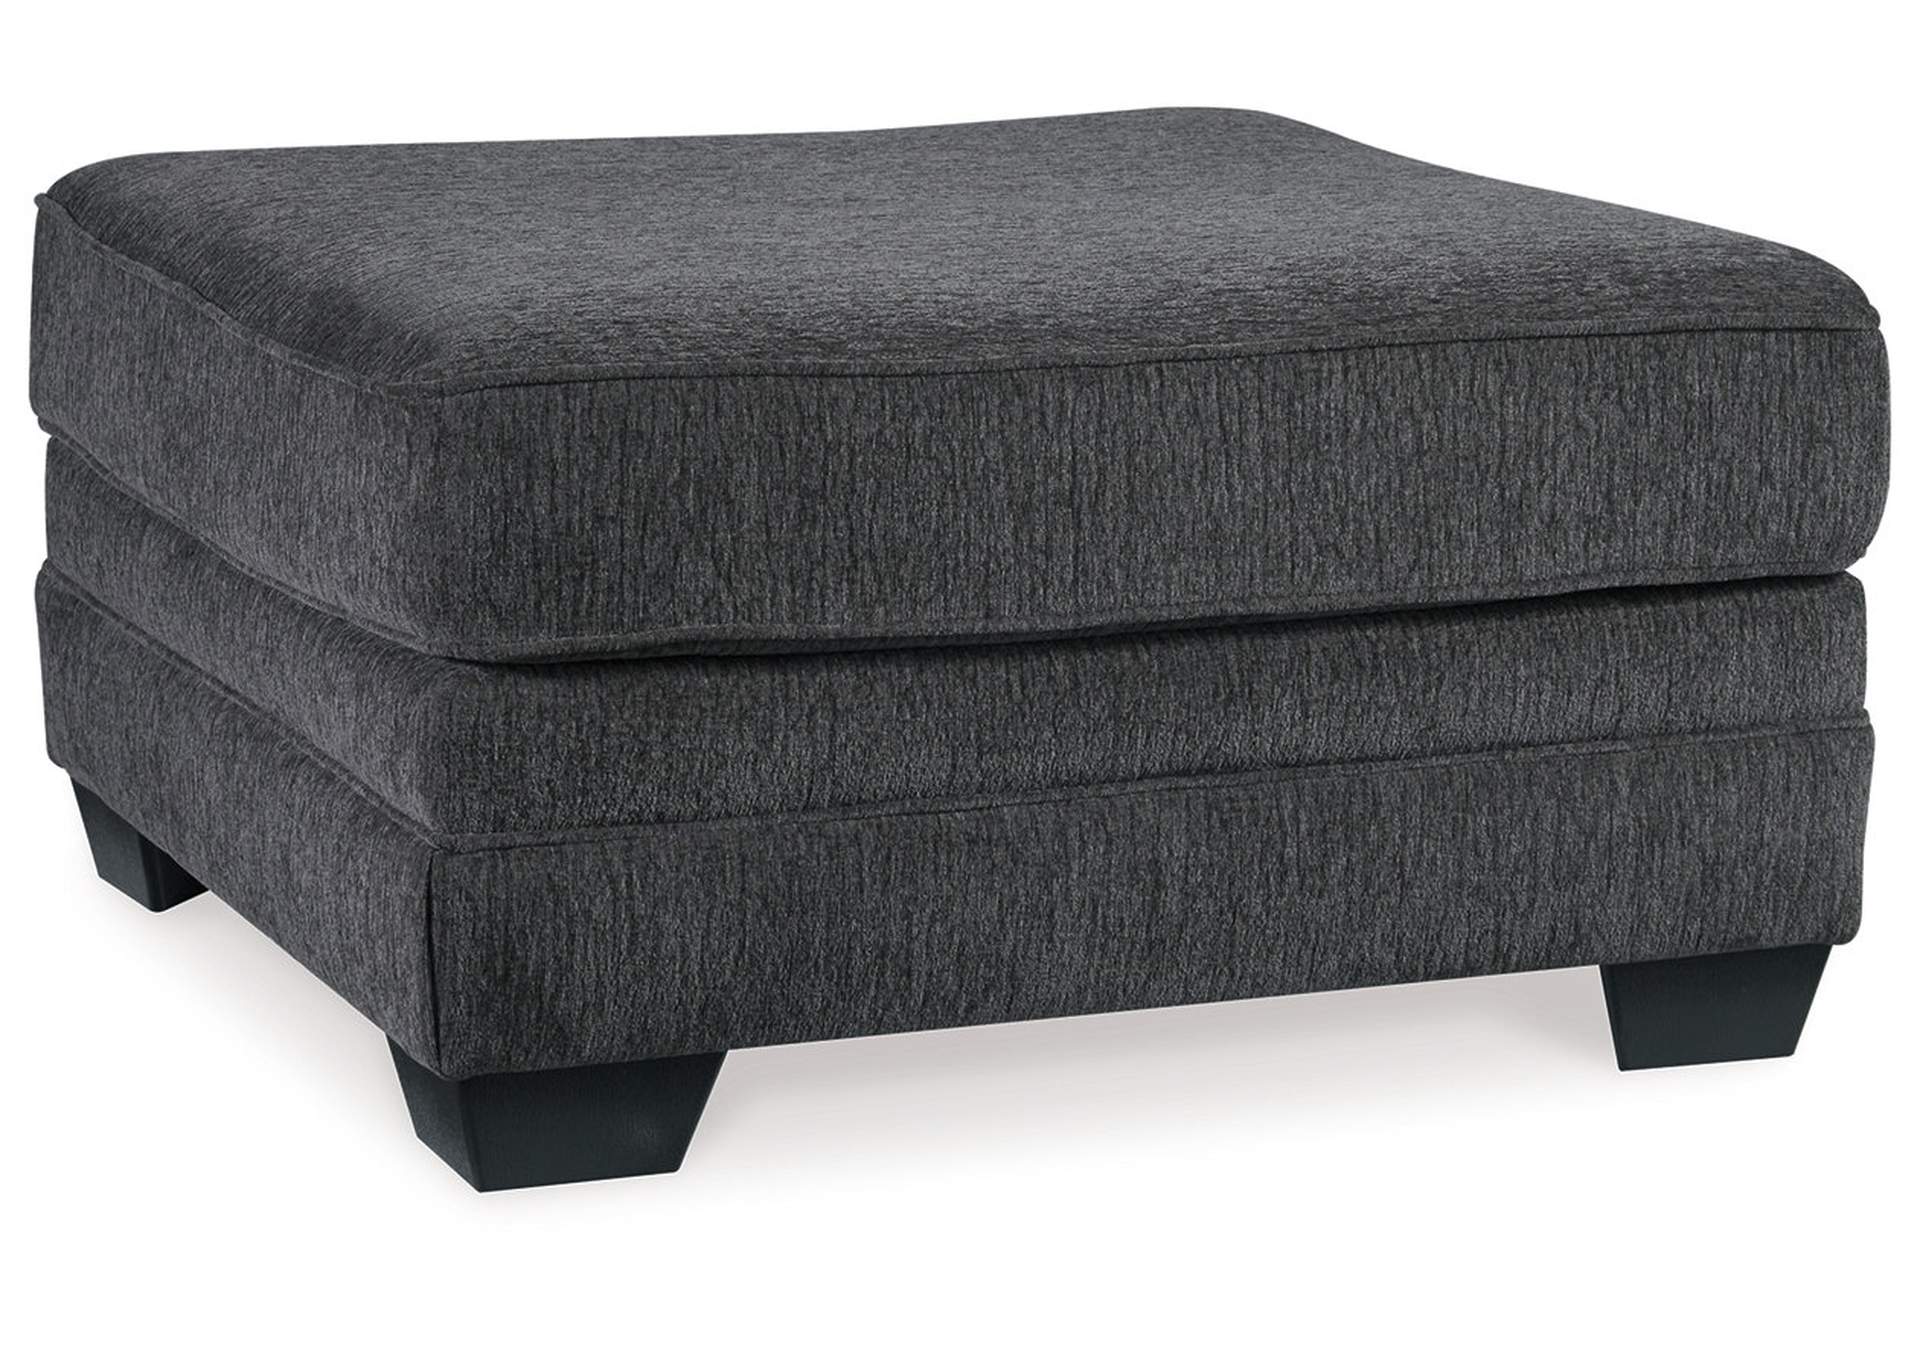 Tracling Oversized Ottoman,Direct To Consumer Express